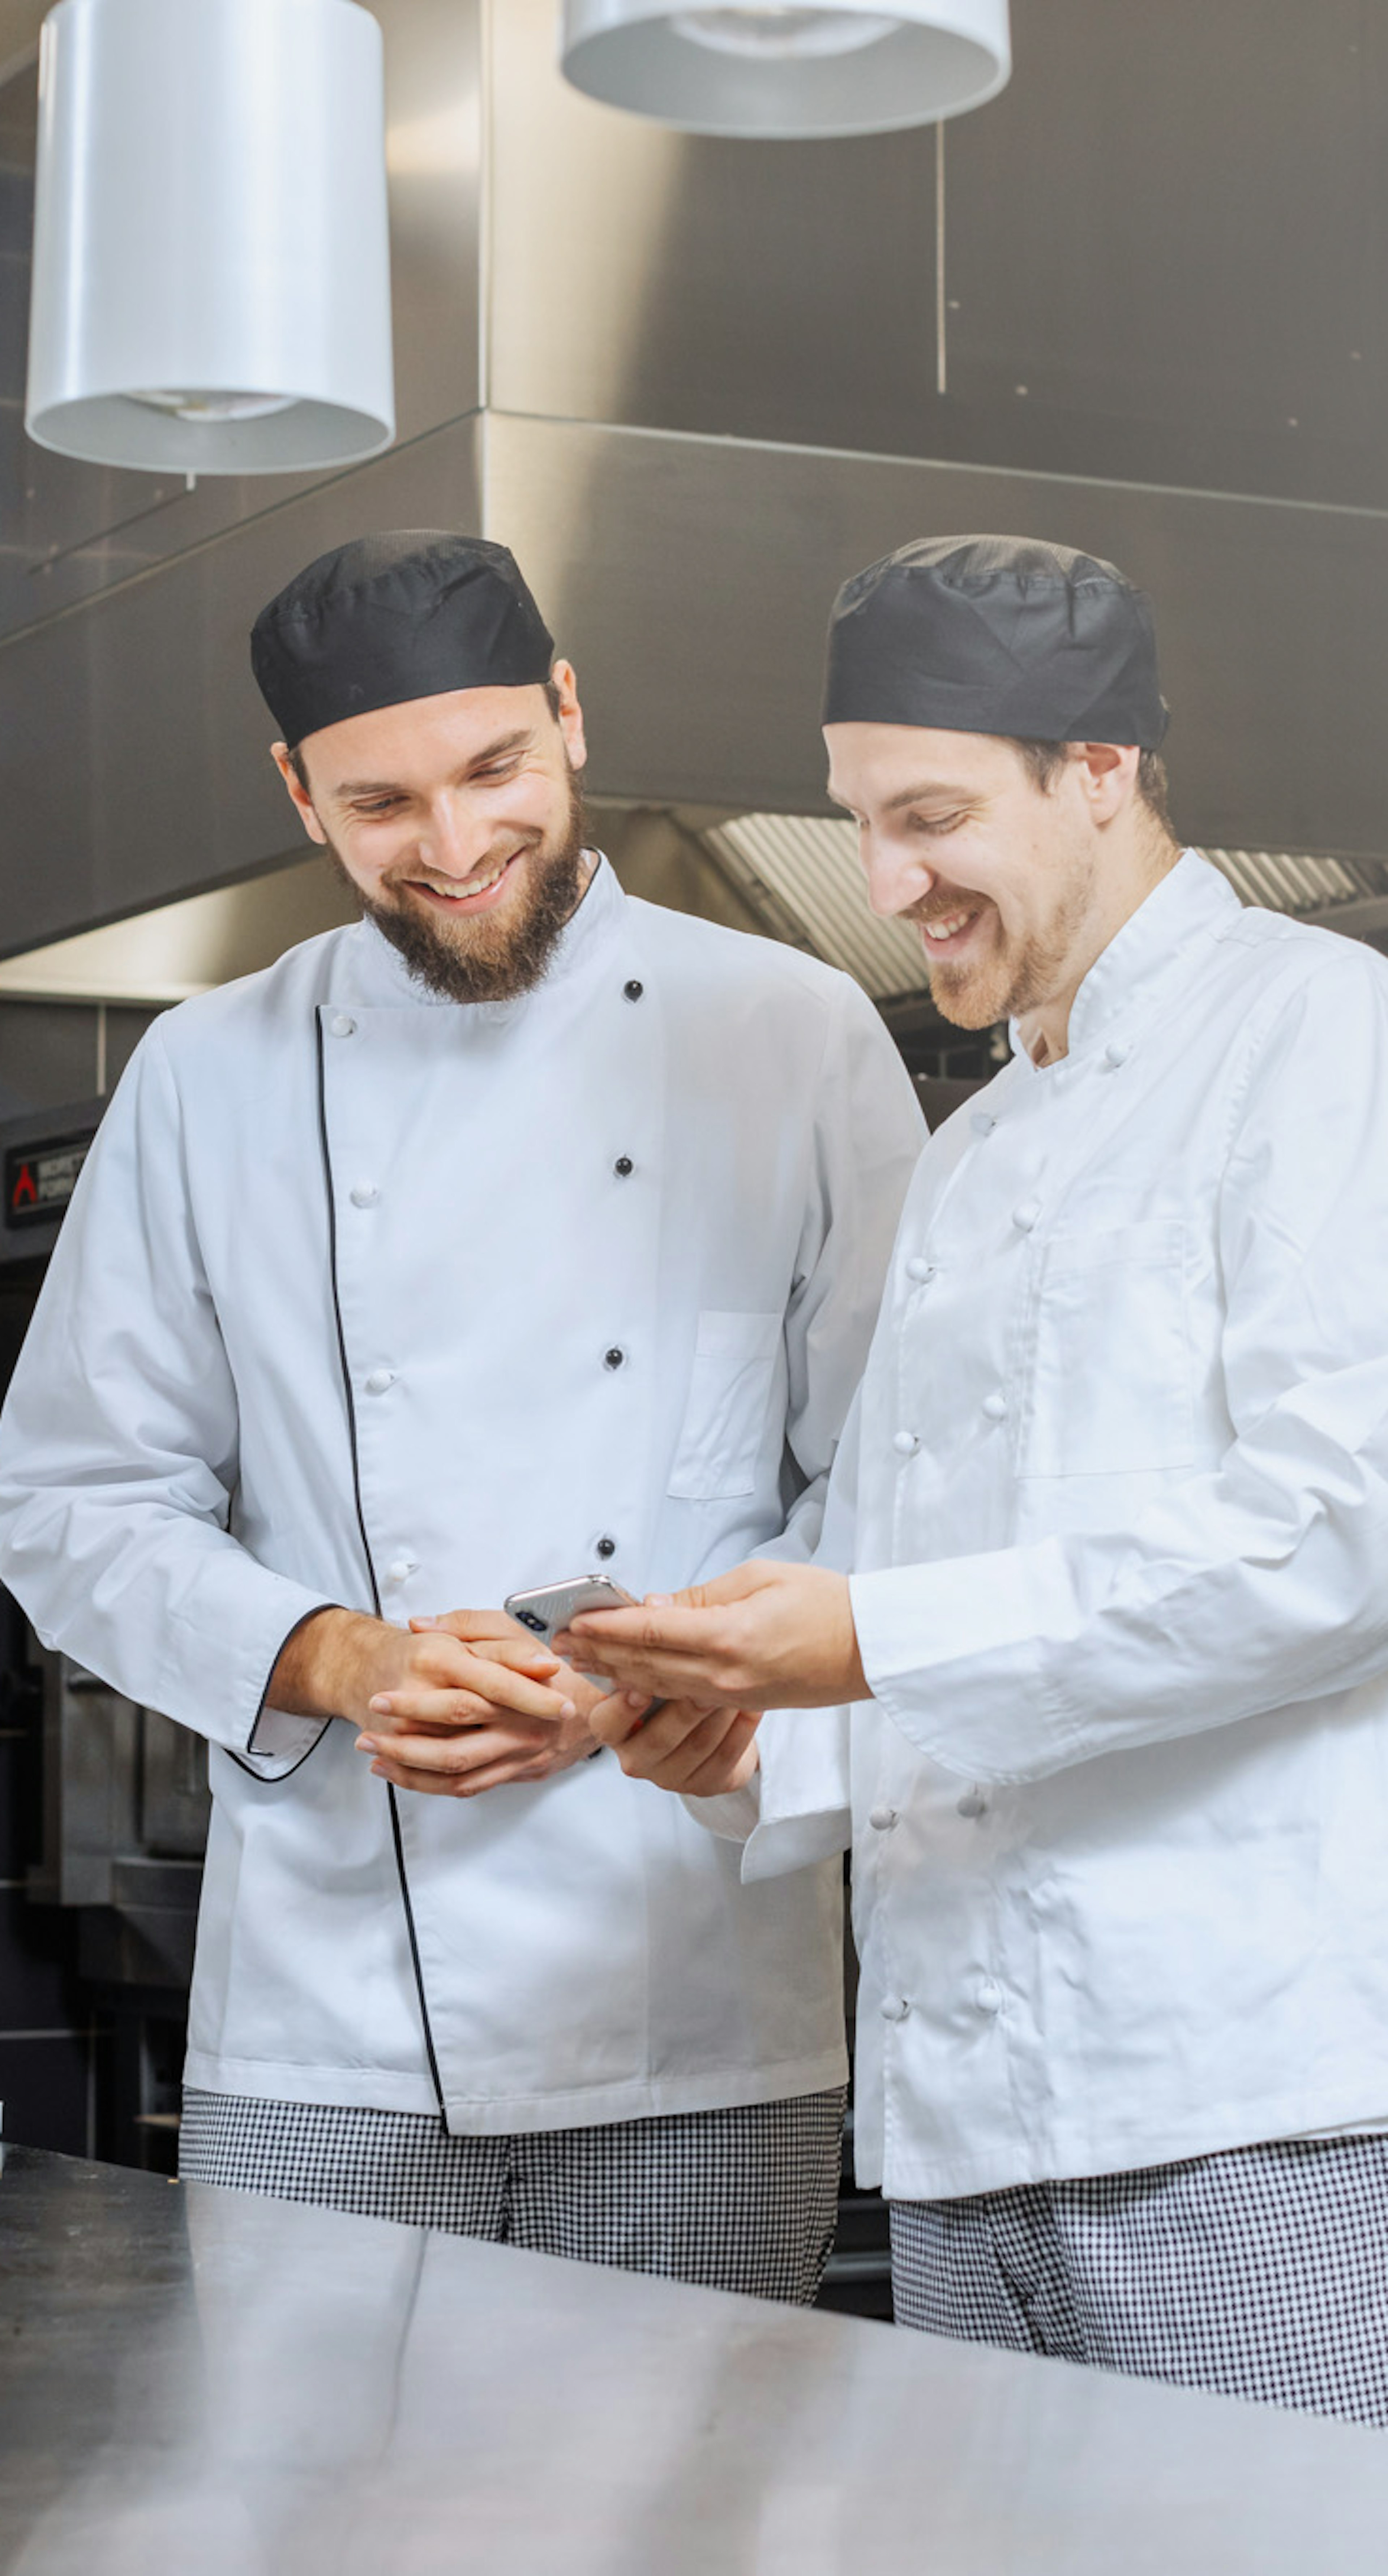 Two cooks looking at a mobile phone